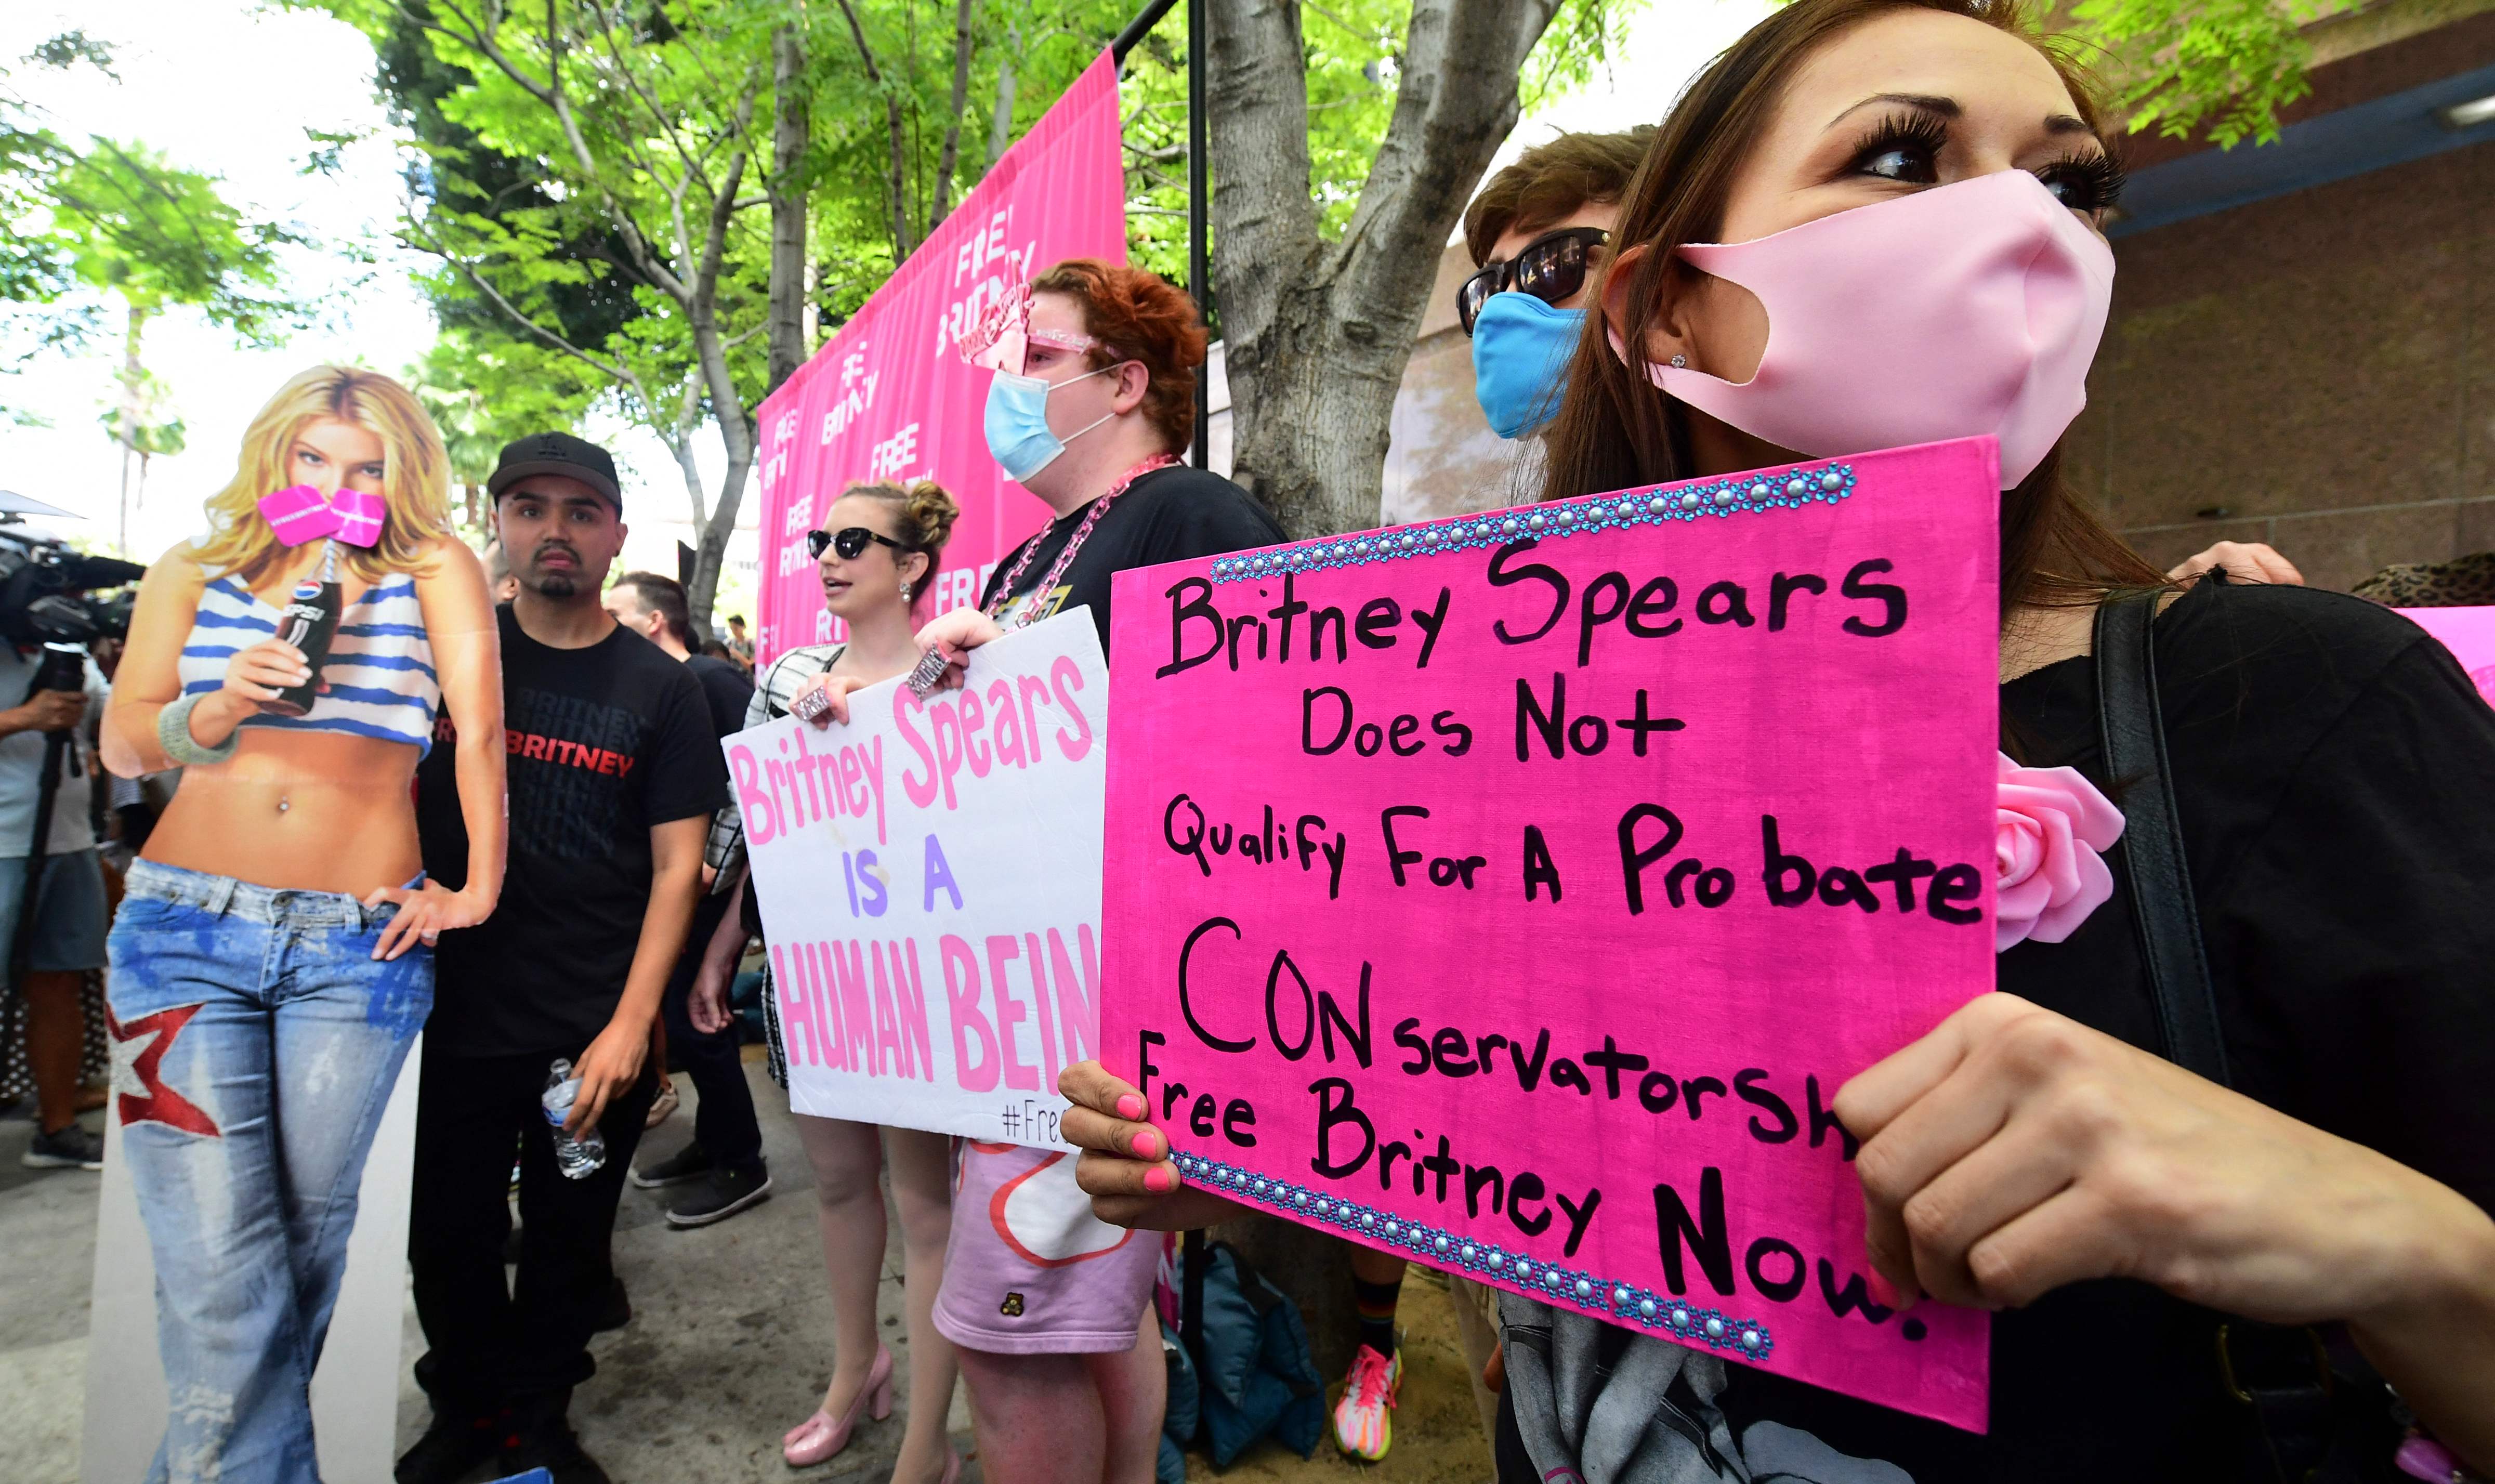 Fans and supporters of Britney Spears gather outside the County Courthouse in Los Angeles, Calfornia on June 23, 2021, during a scheduled hearing in Spears' conservatorship case